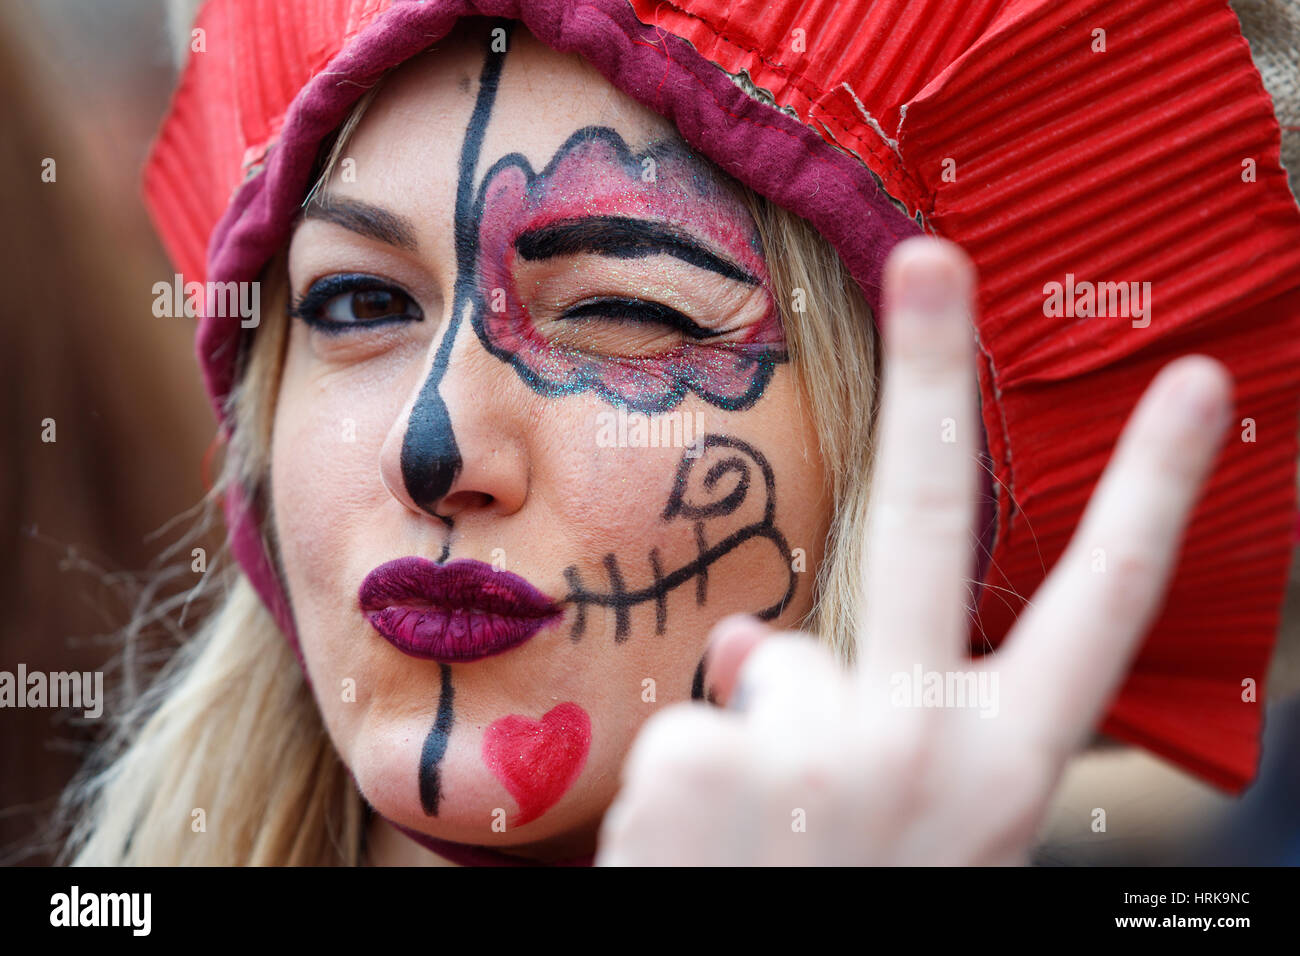 Xanthi, Greece - February 26,2017: People dressed in colorful costumes during the annual carnival parade in Xanthi, Greece.The event is very popular a Stock Photo